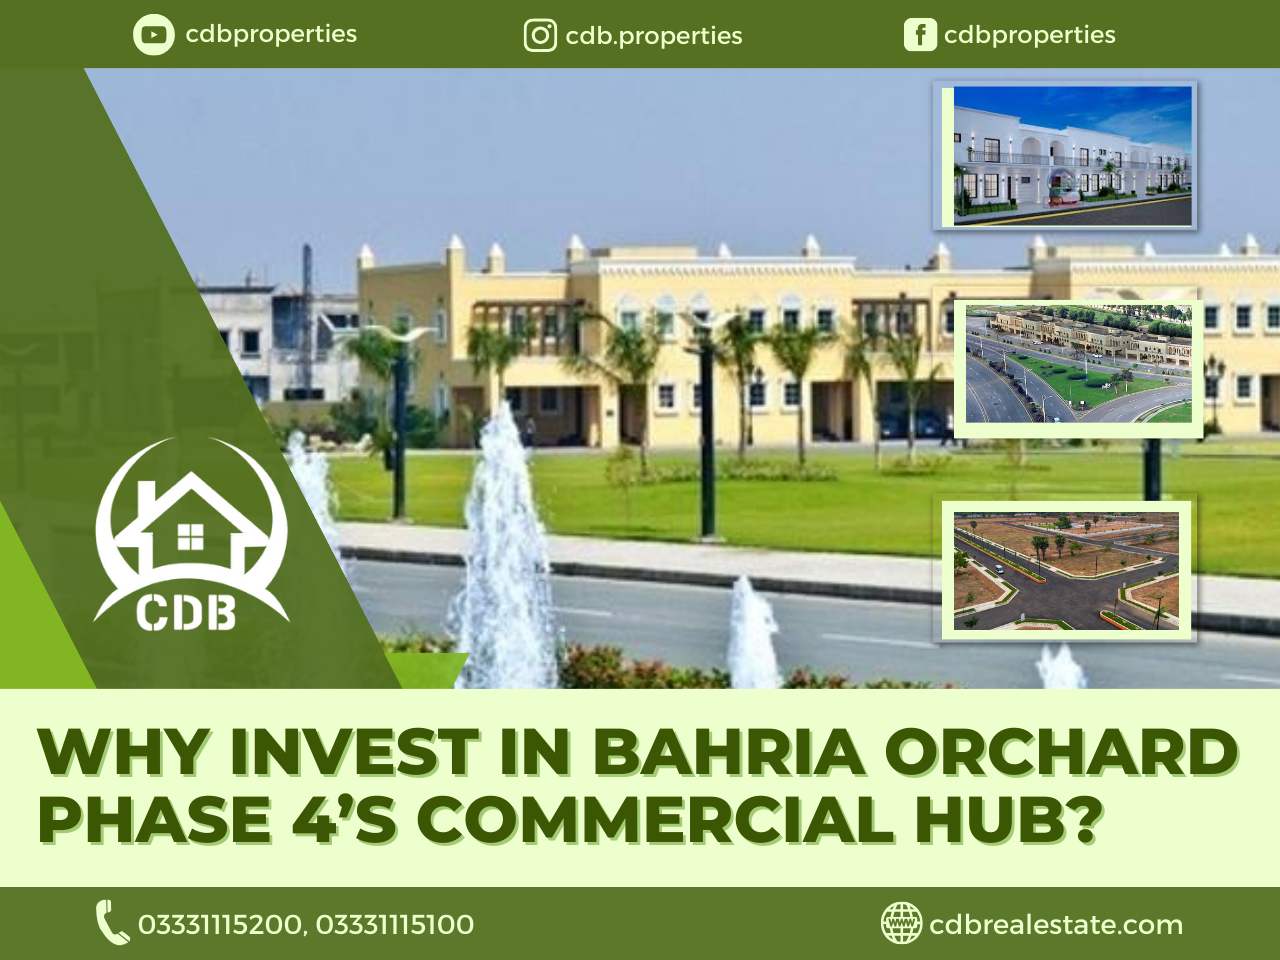 Why Invest in Bahria Orchard Phase 4’s Commercial Hub?